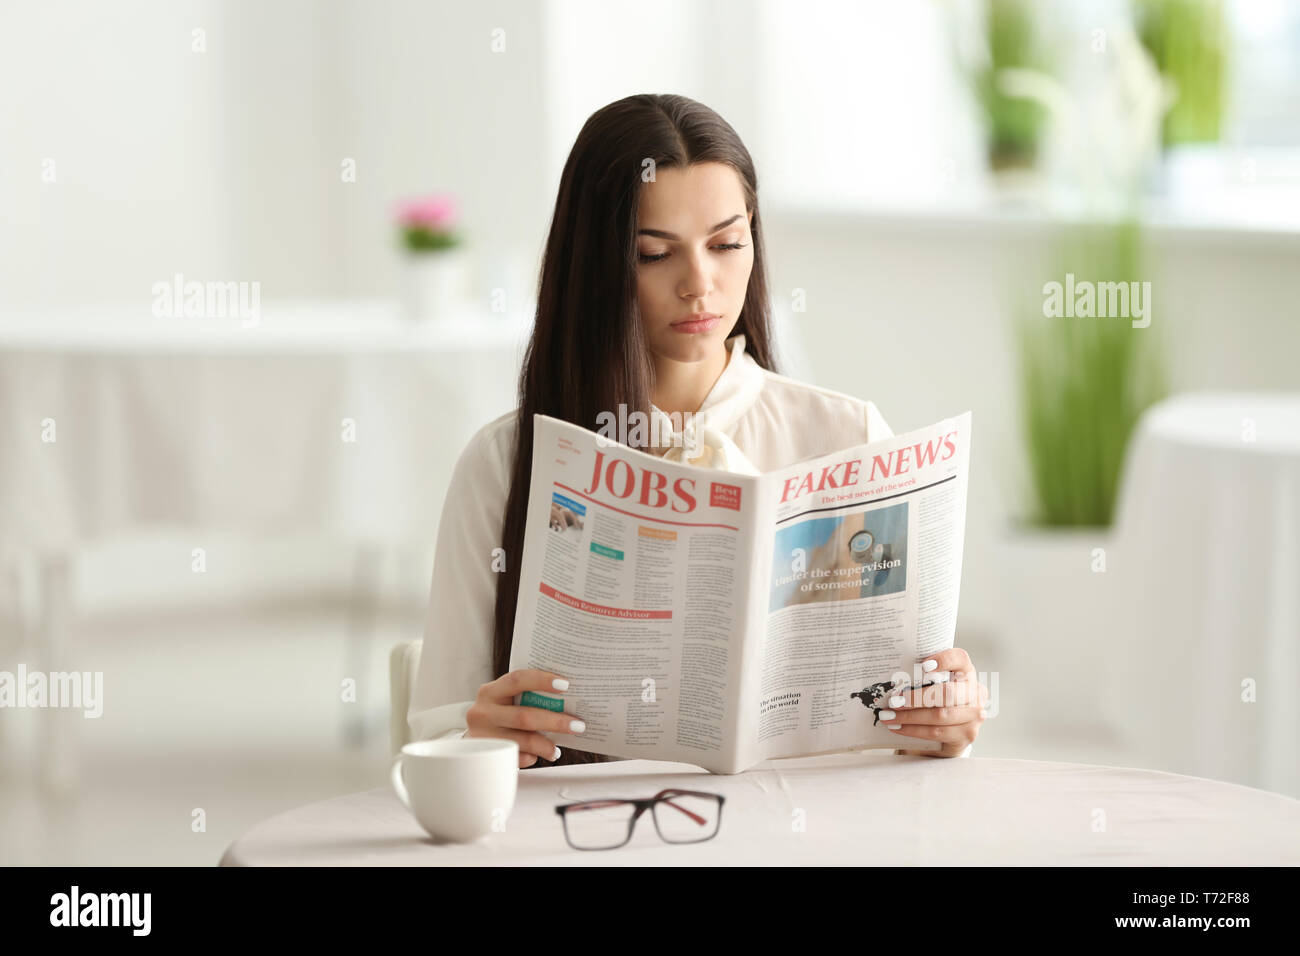 Young woman reading newspaper in cafe Banque D'Images